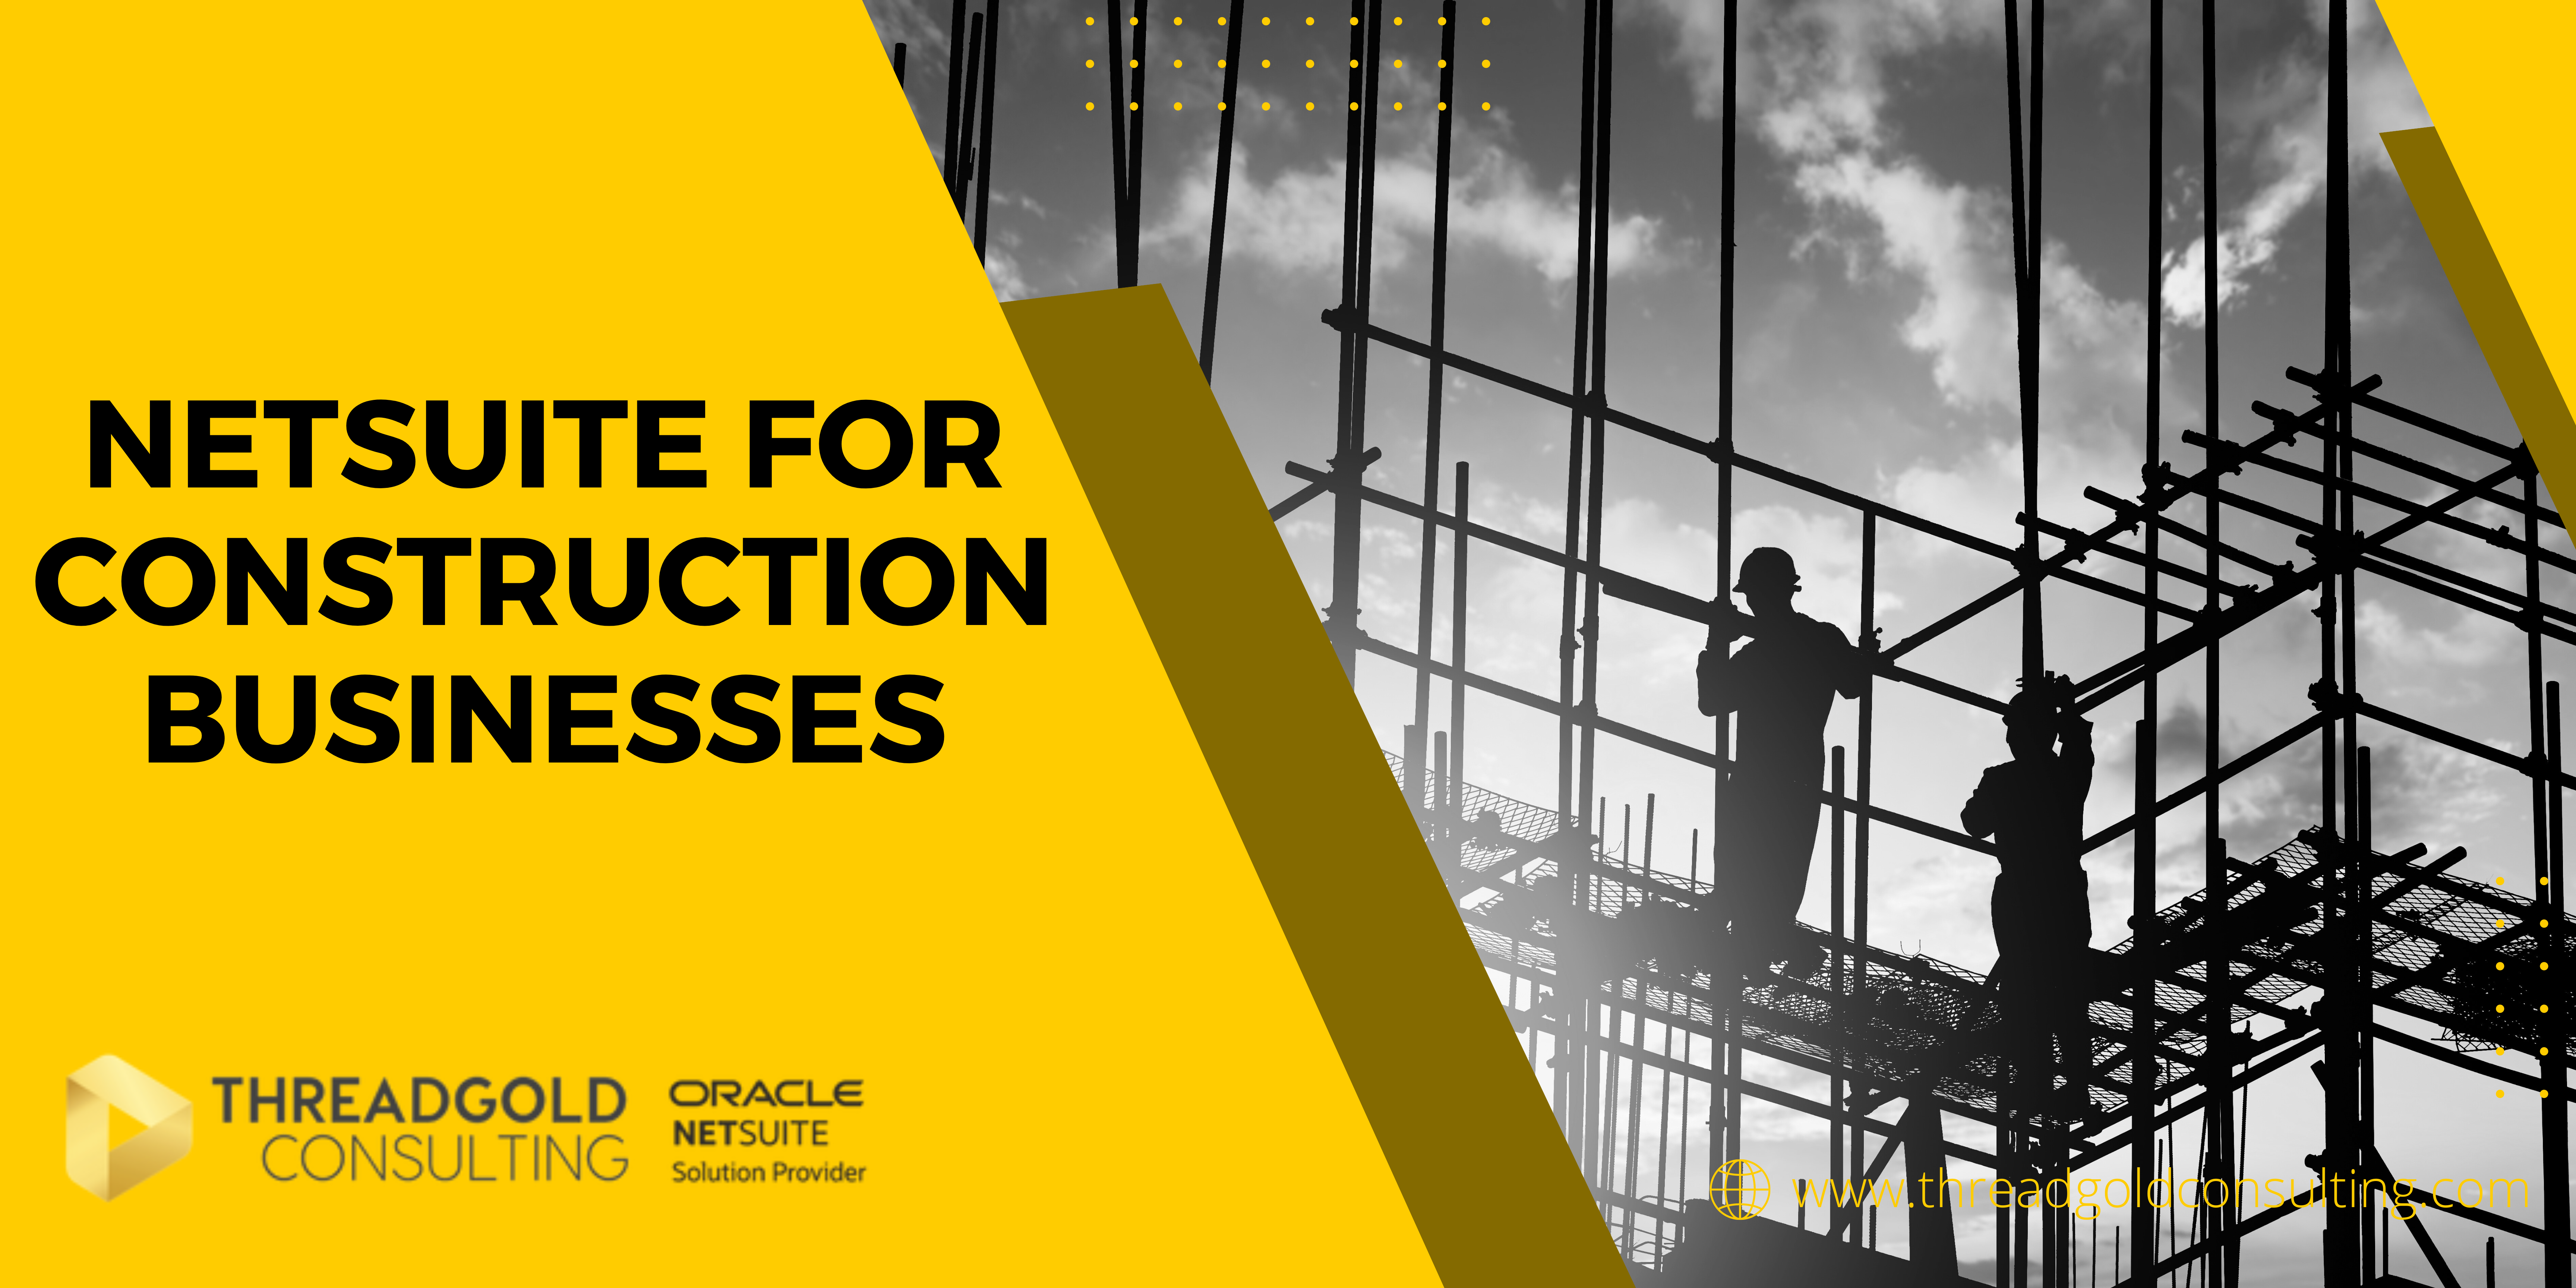 A Guide to NetSuite for Construction Businesses